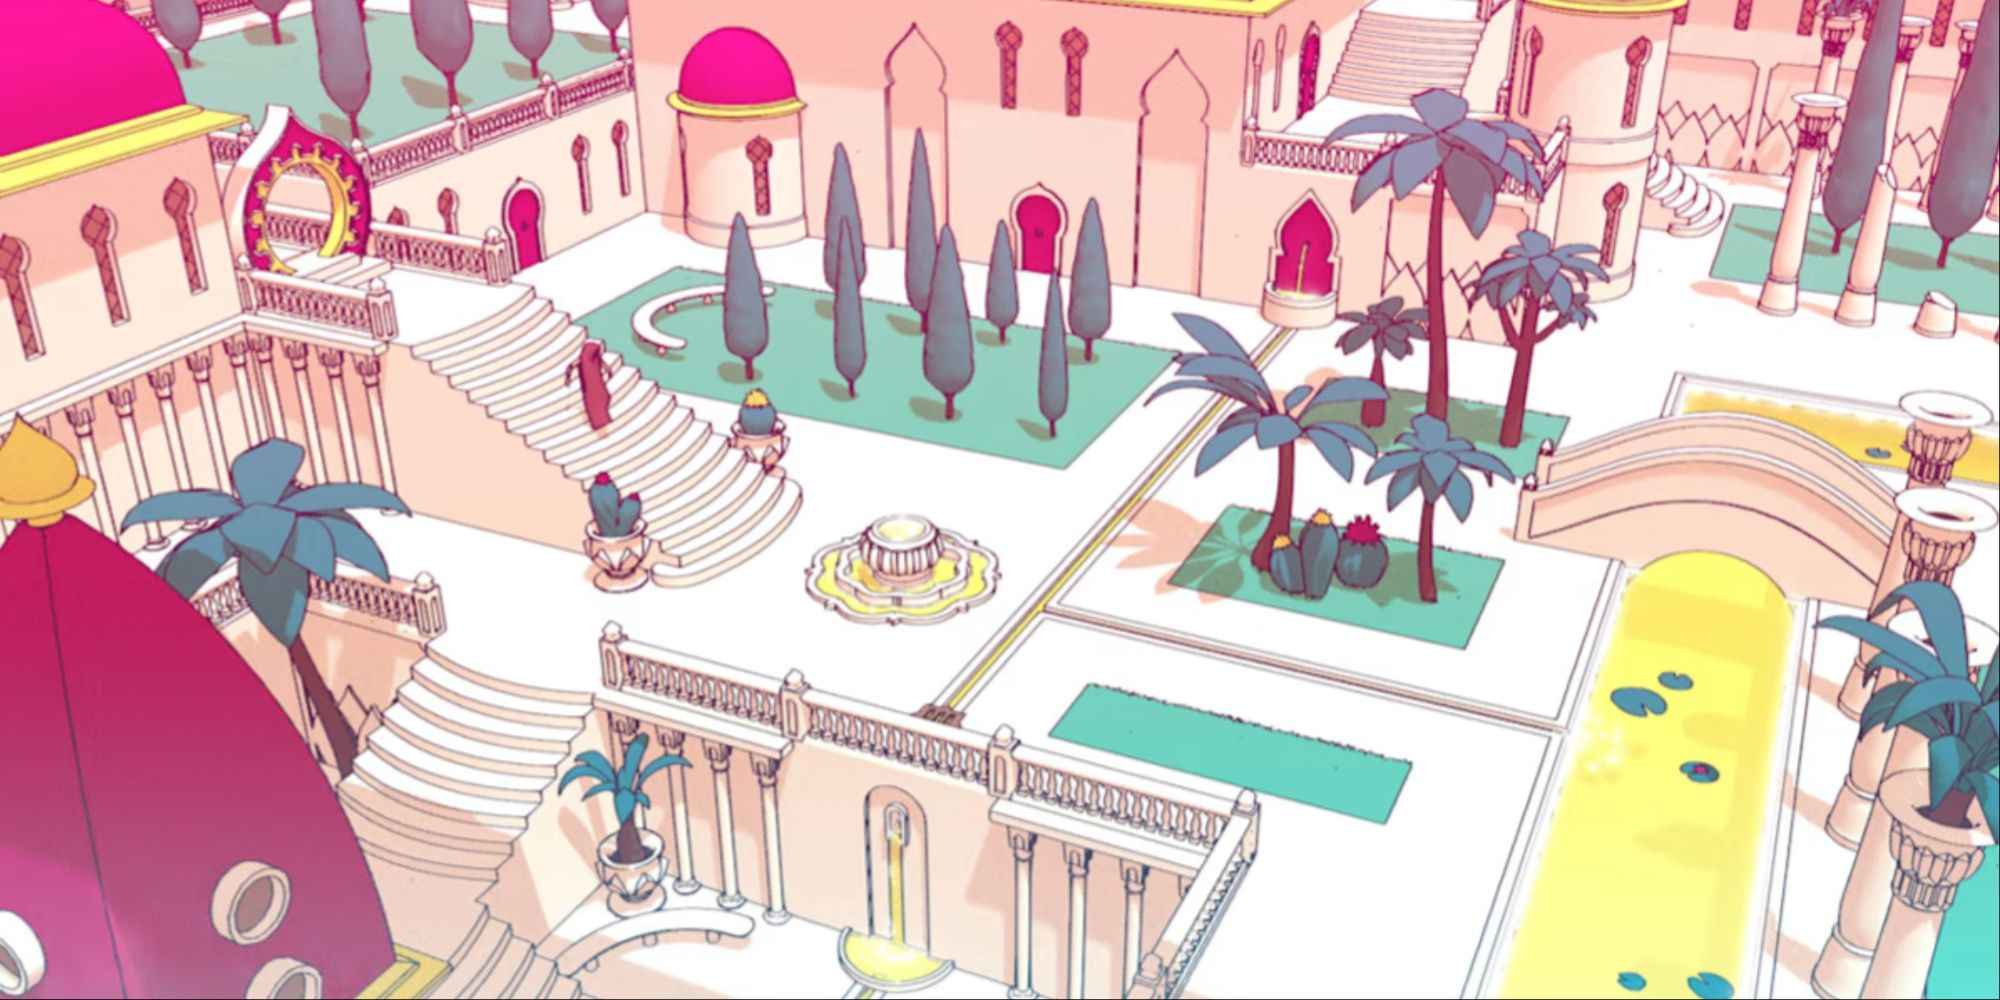 The main protagonist of Chants of Sennaar wandering in a garden areas of a palace featuring vibrant pink, yellow, and greent environment art.